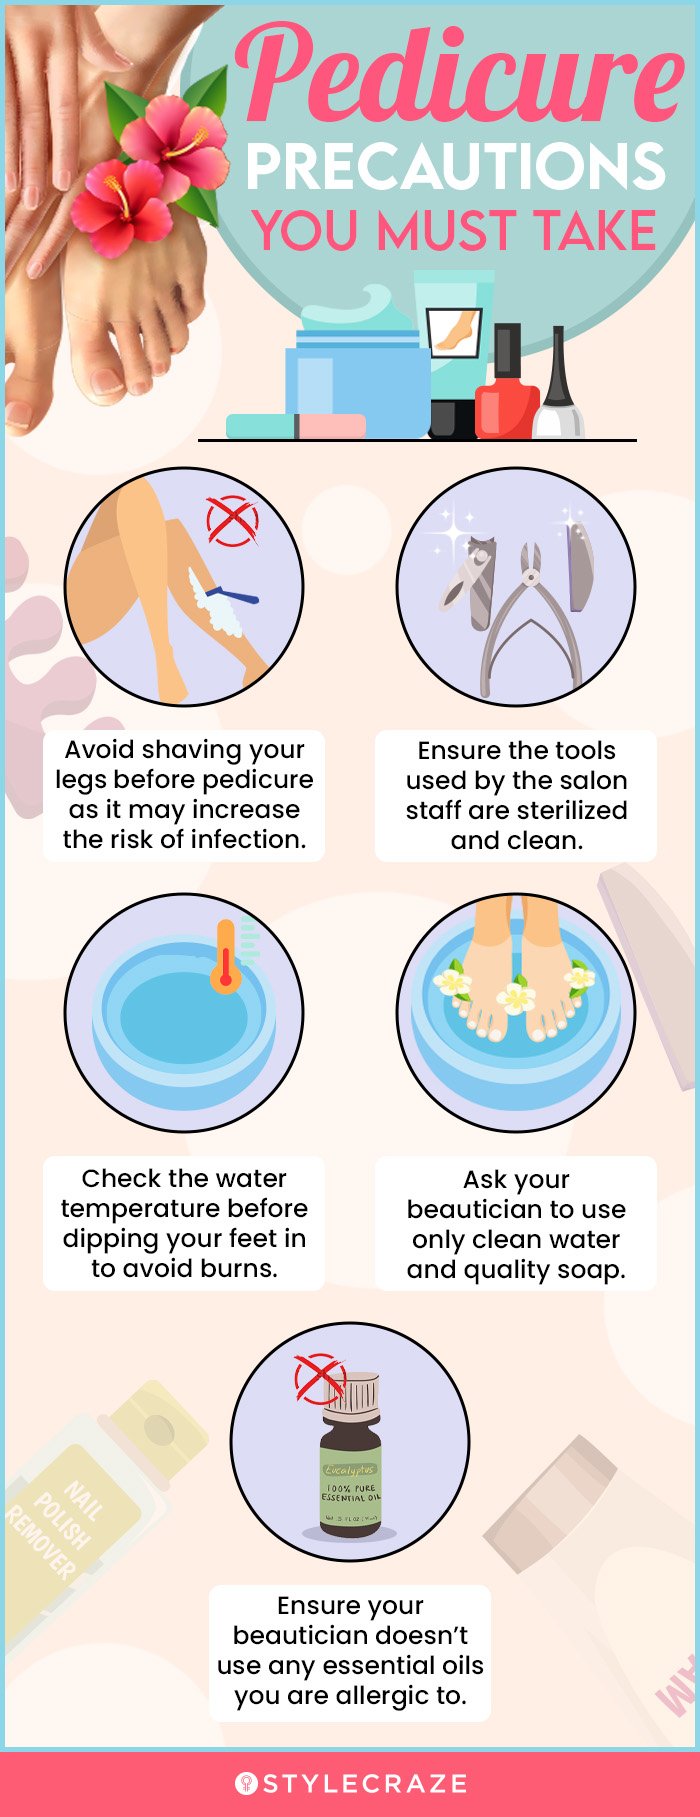 pedicure precautions you must take (infographic)